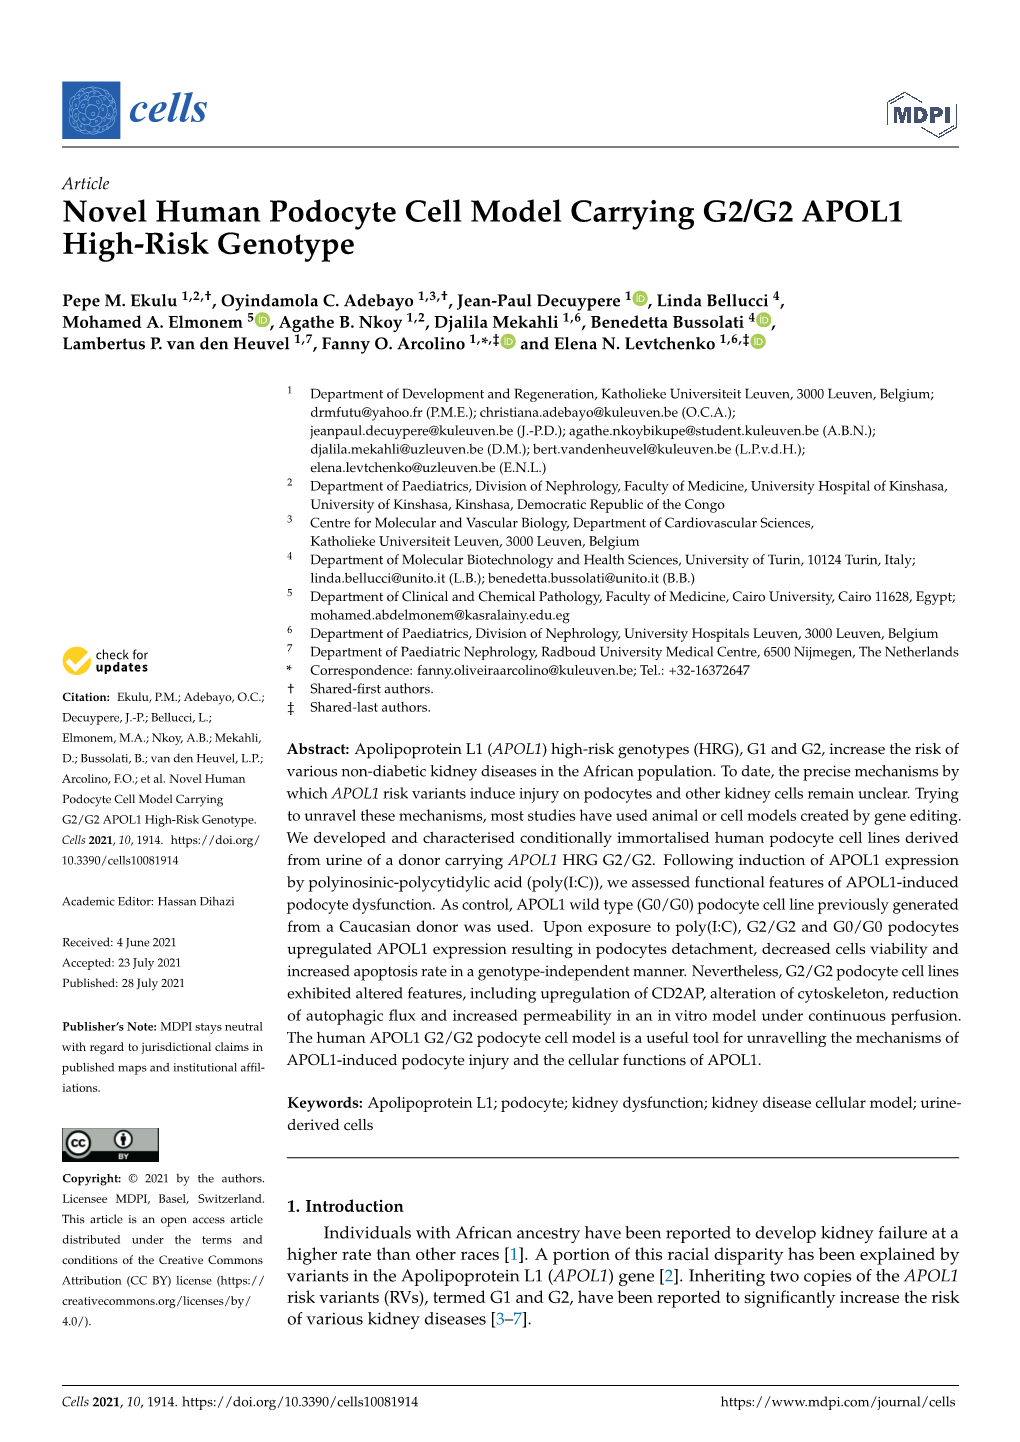 Novel Human Podocyte Cell Model Carrying G2/G2 APOL1 High-Risk Genotype